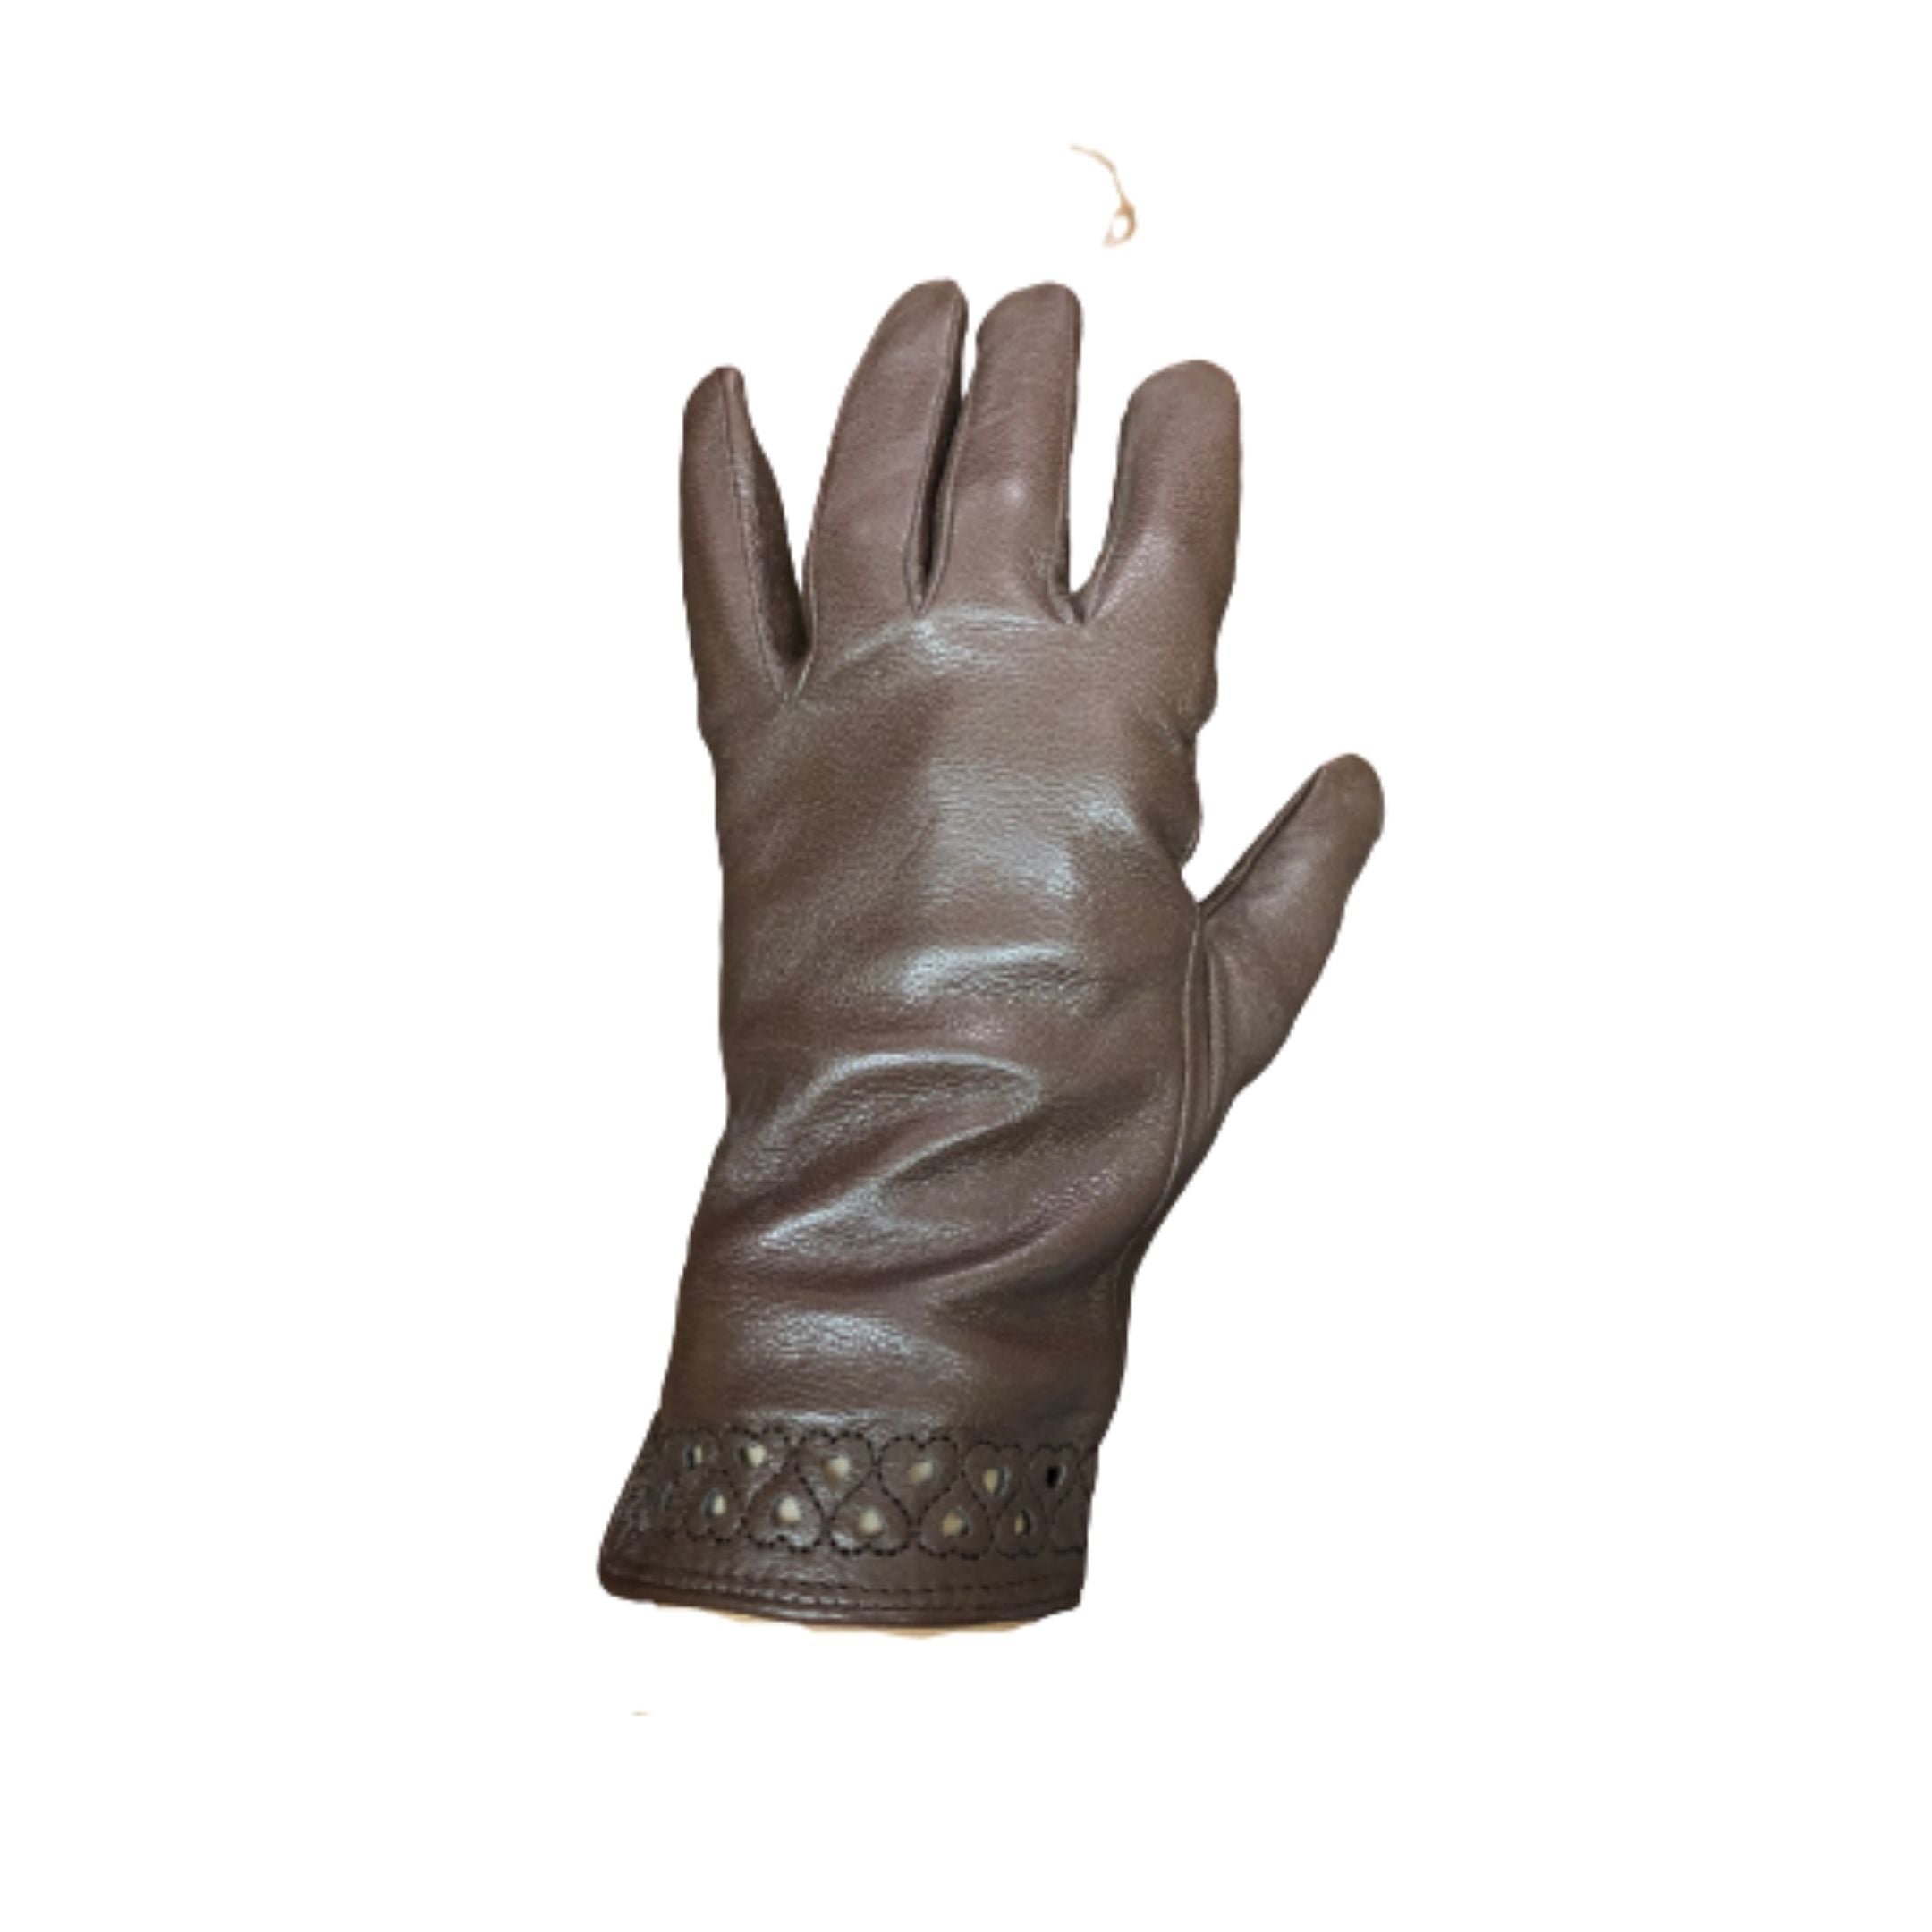 Top view of brown leather gloves with heart shaped stitching and cutouts along the cuff.